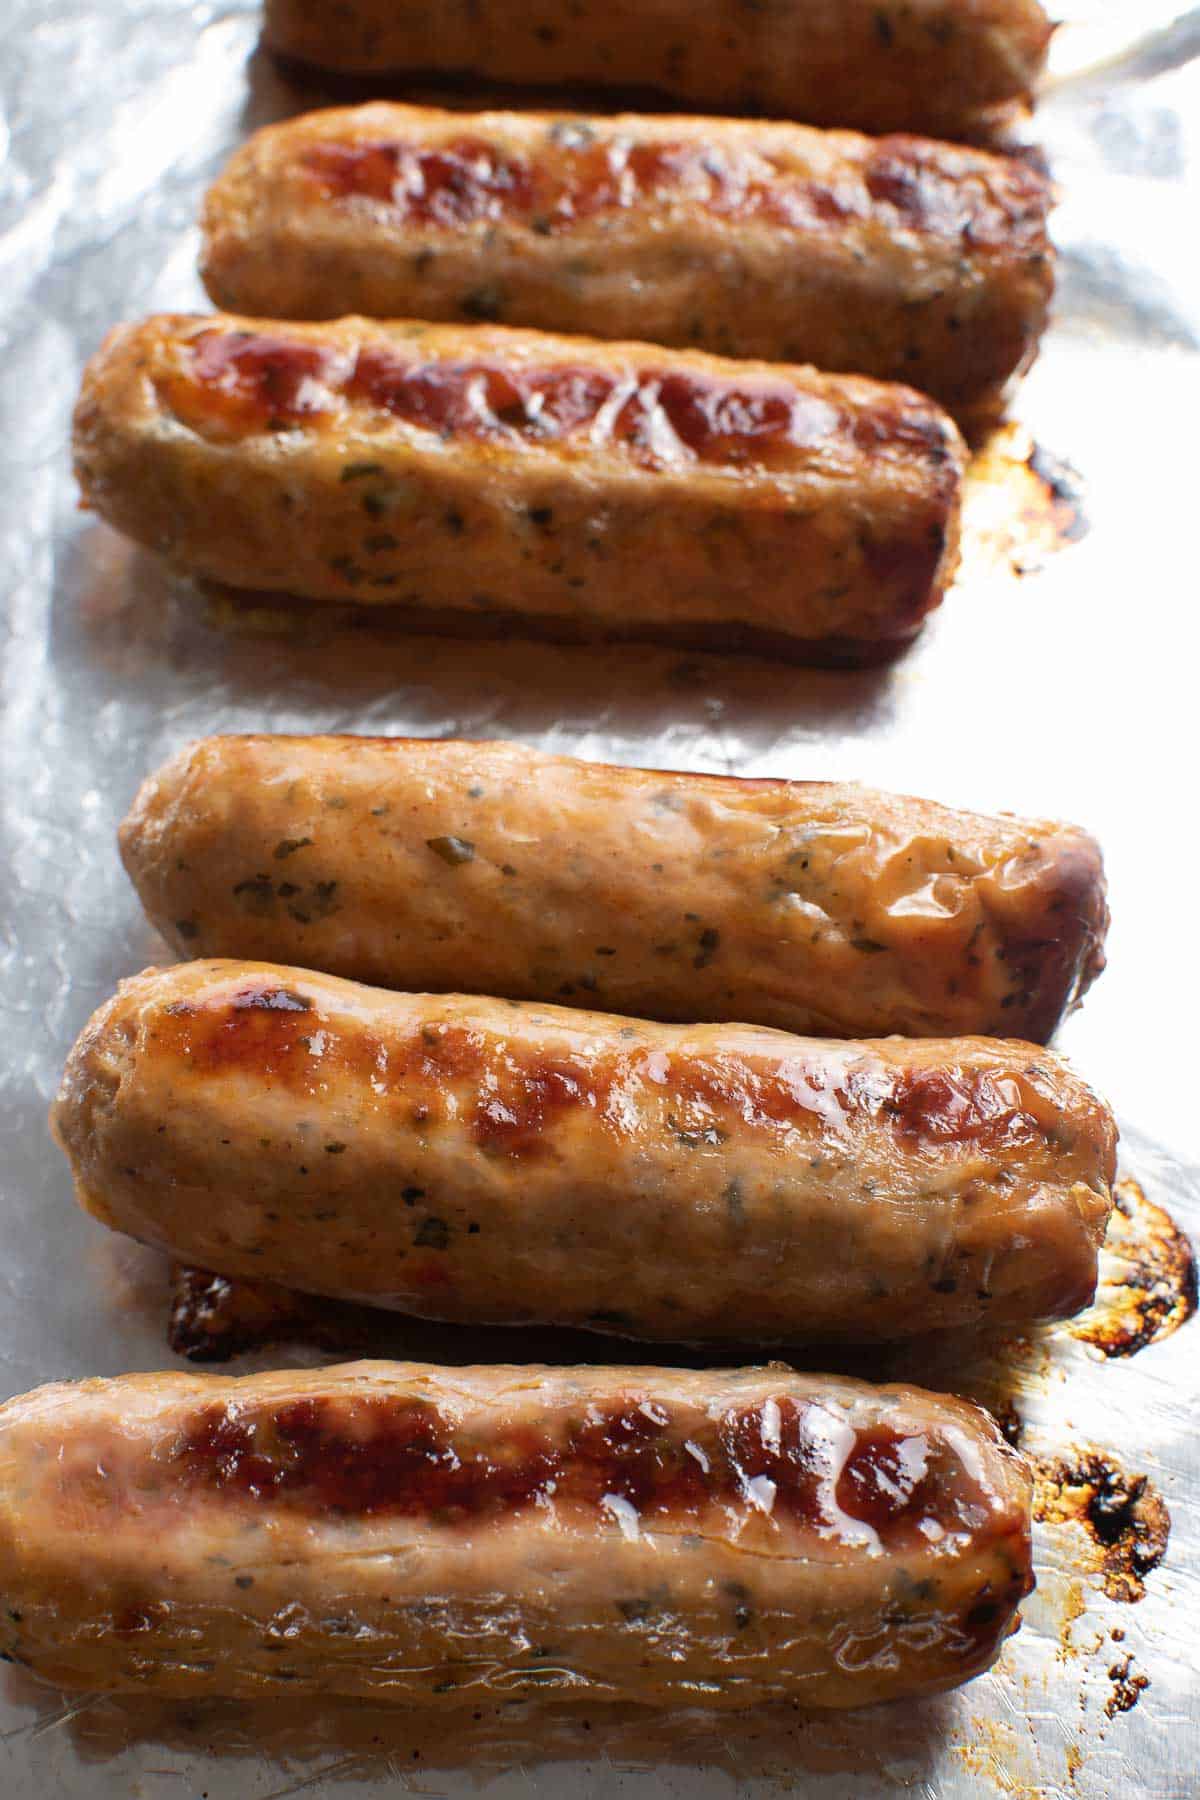 Baked sausages on a baking sheet.